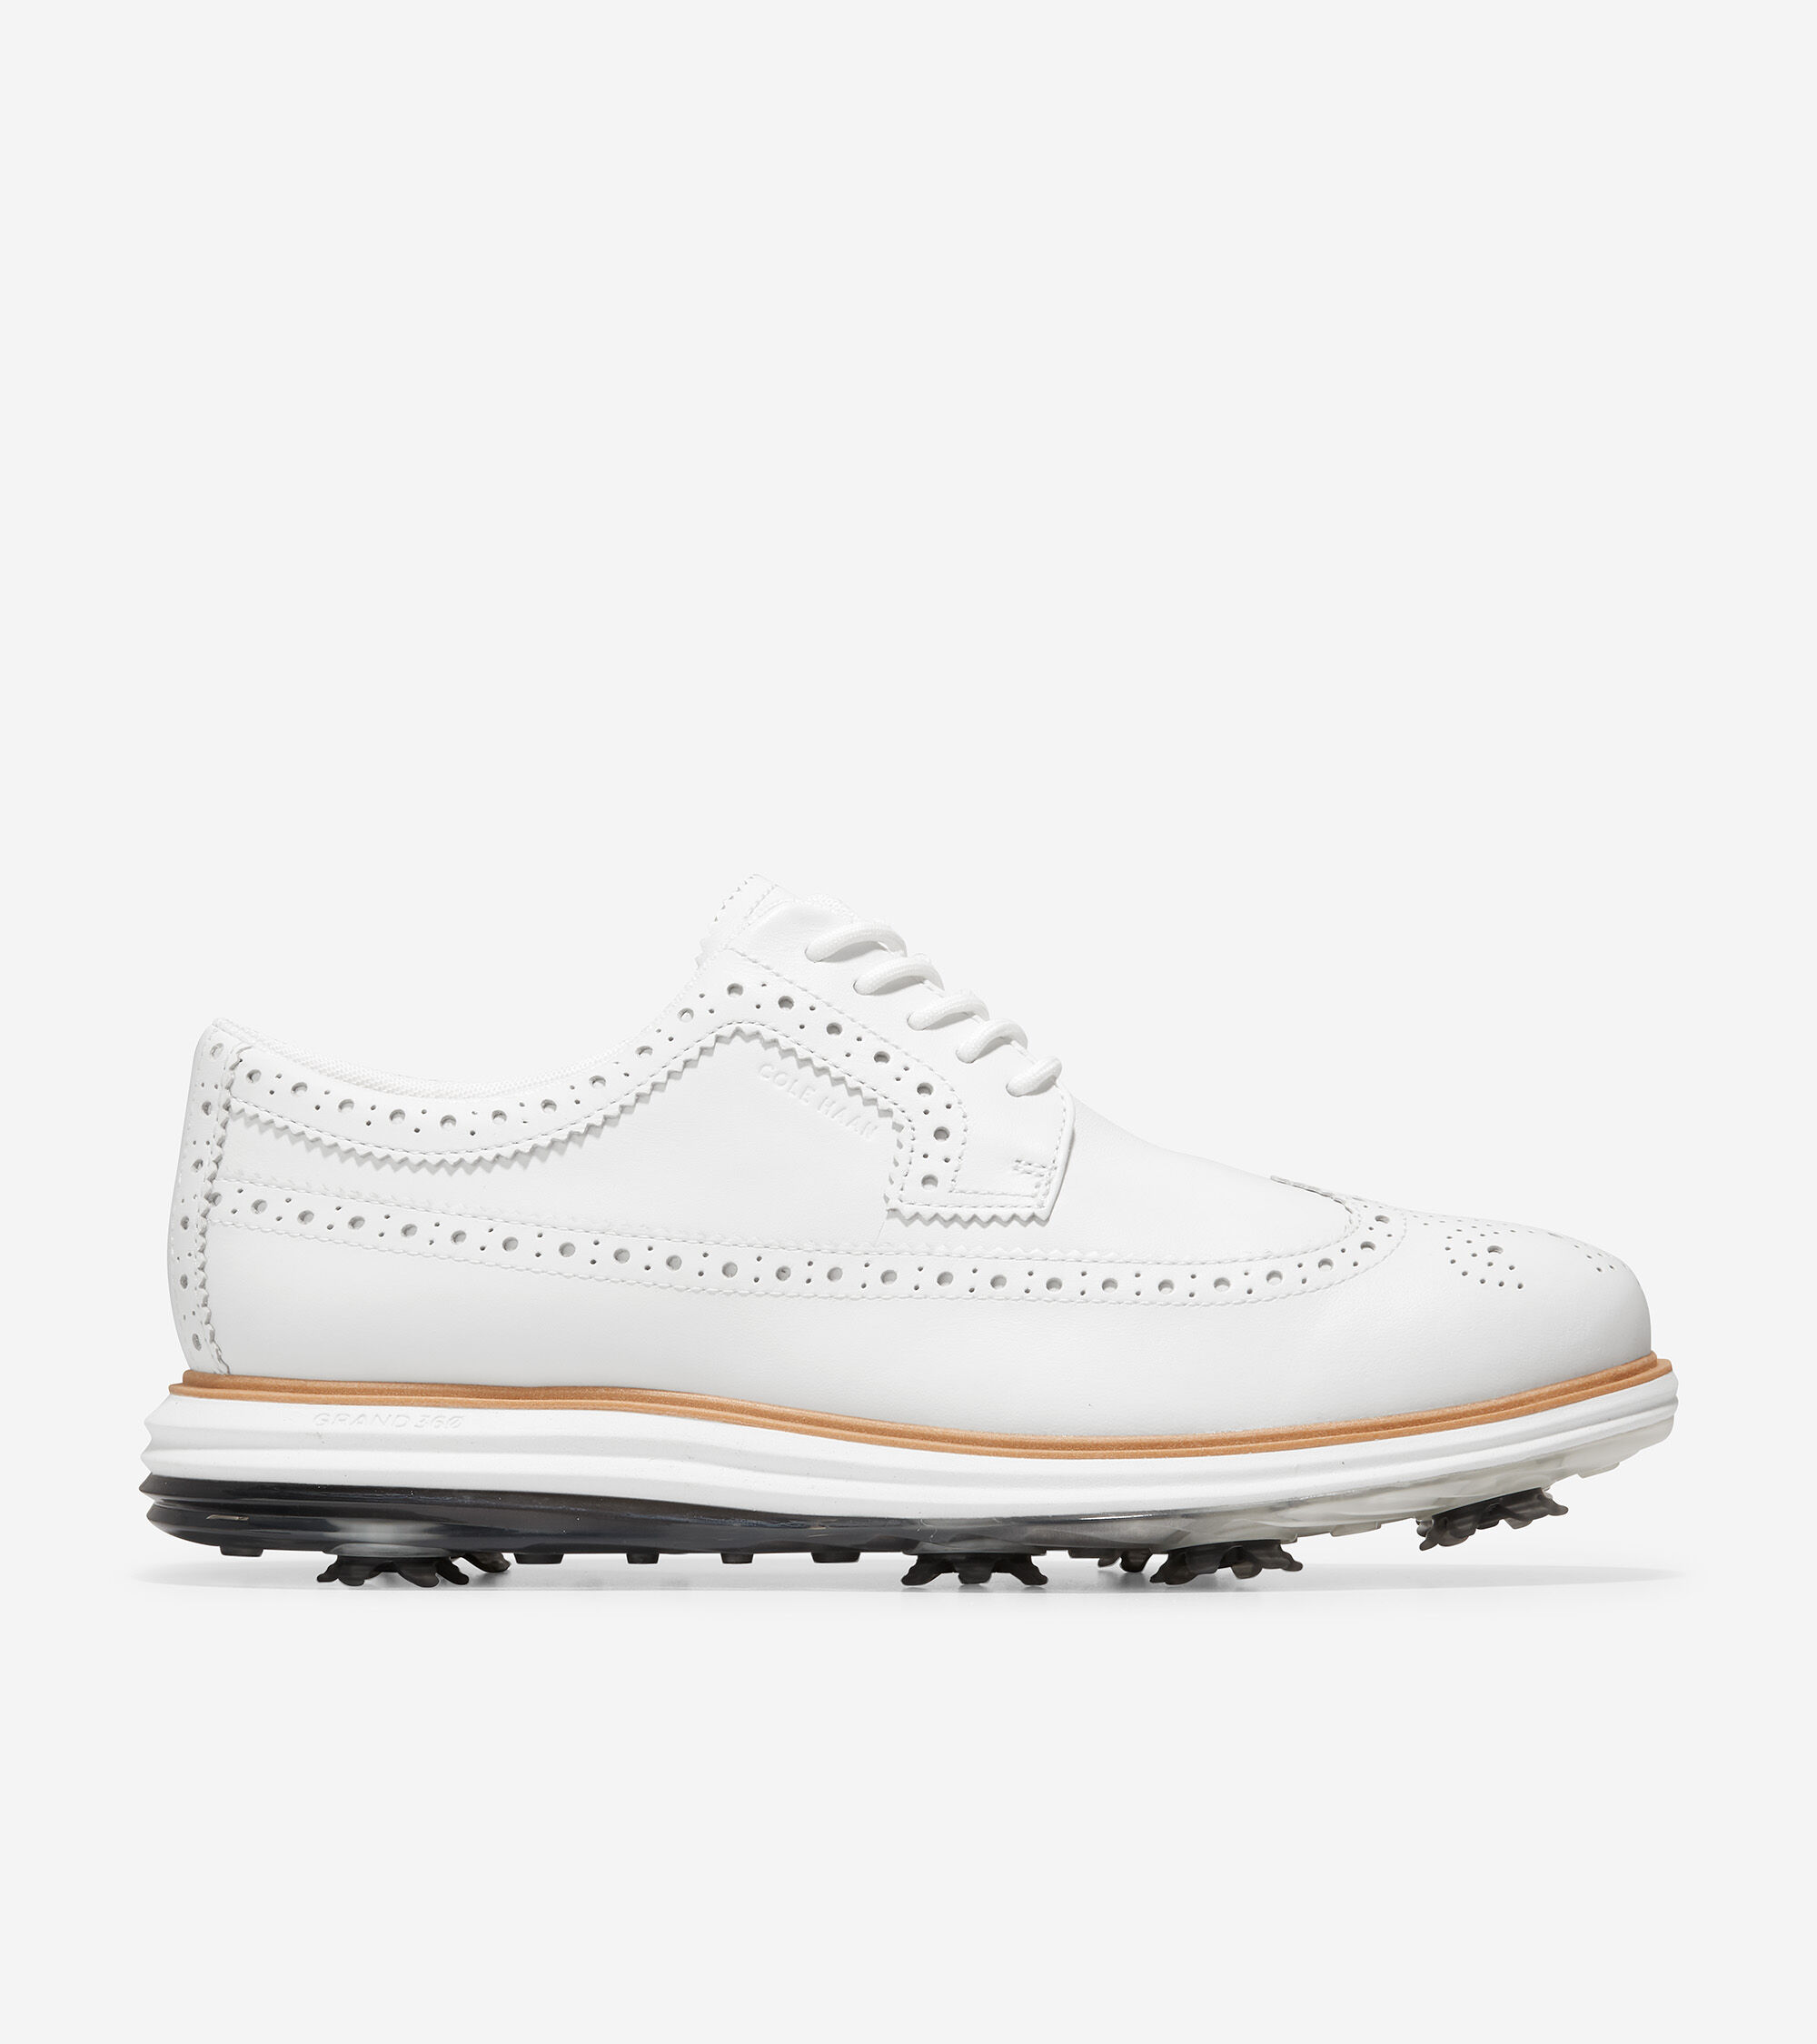 Women's Golf Shoes & Soft Spiked Sneakers | Cole Haan